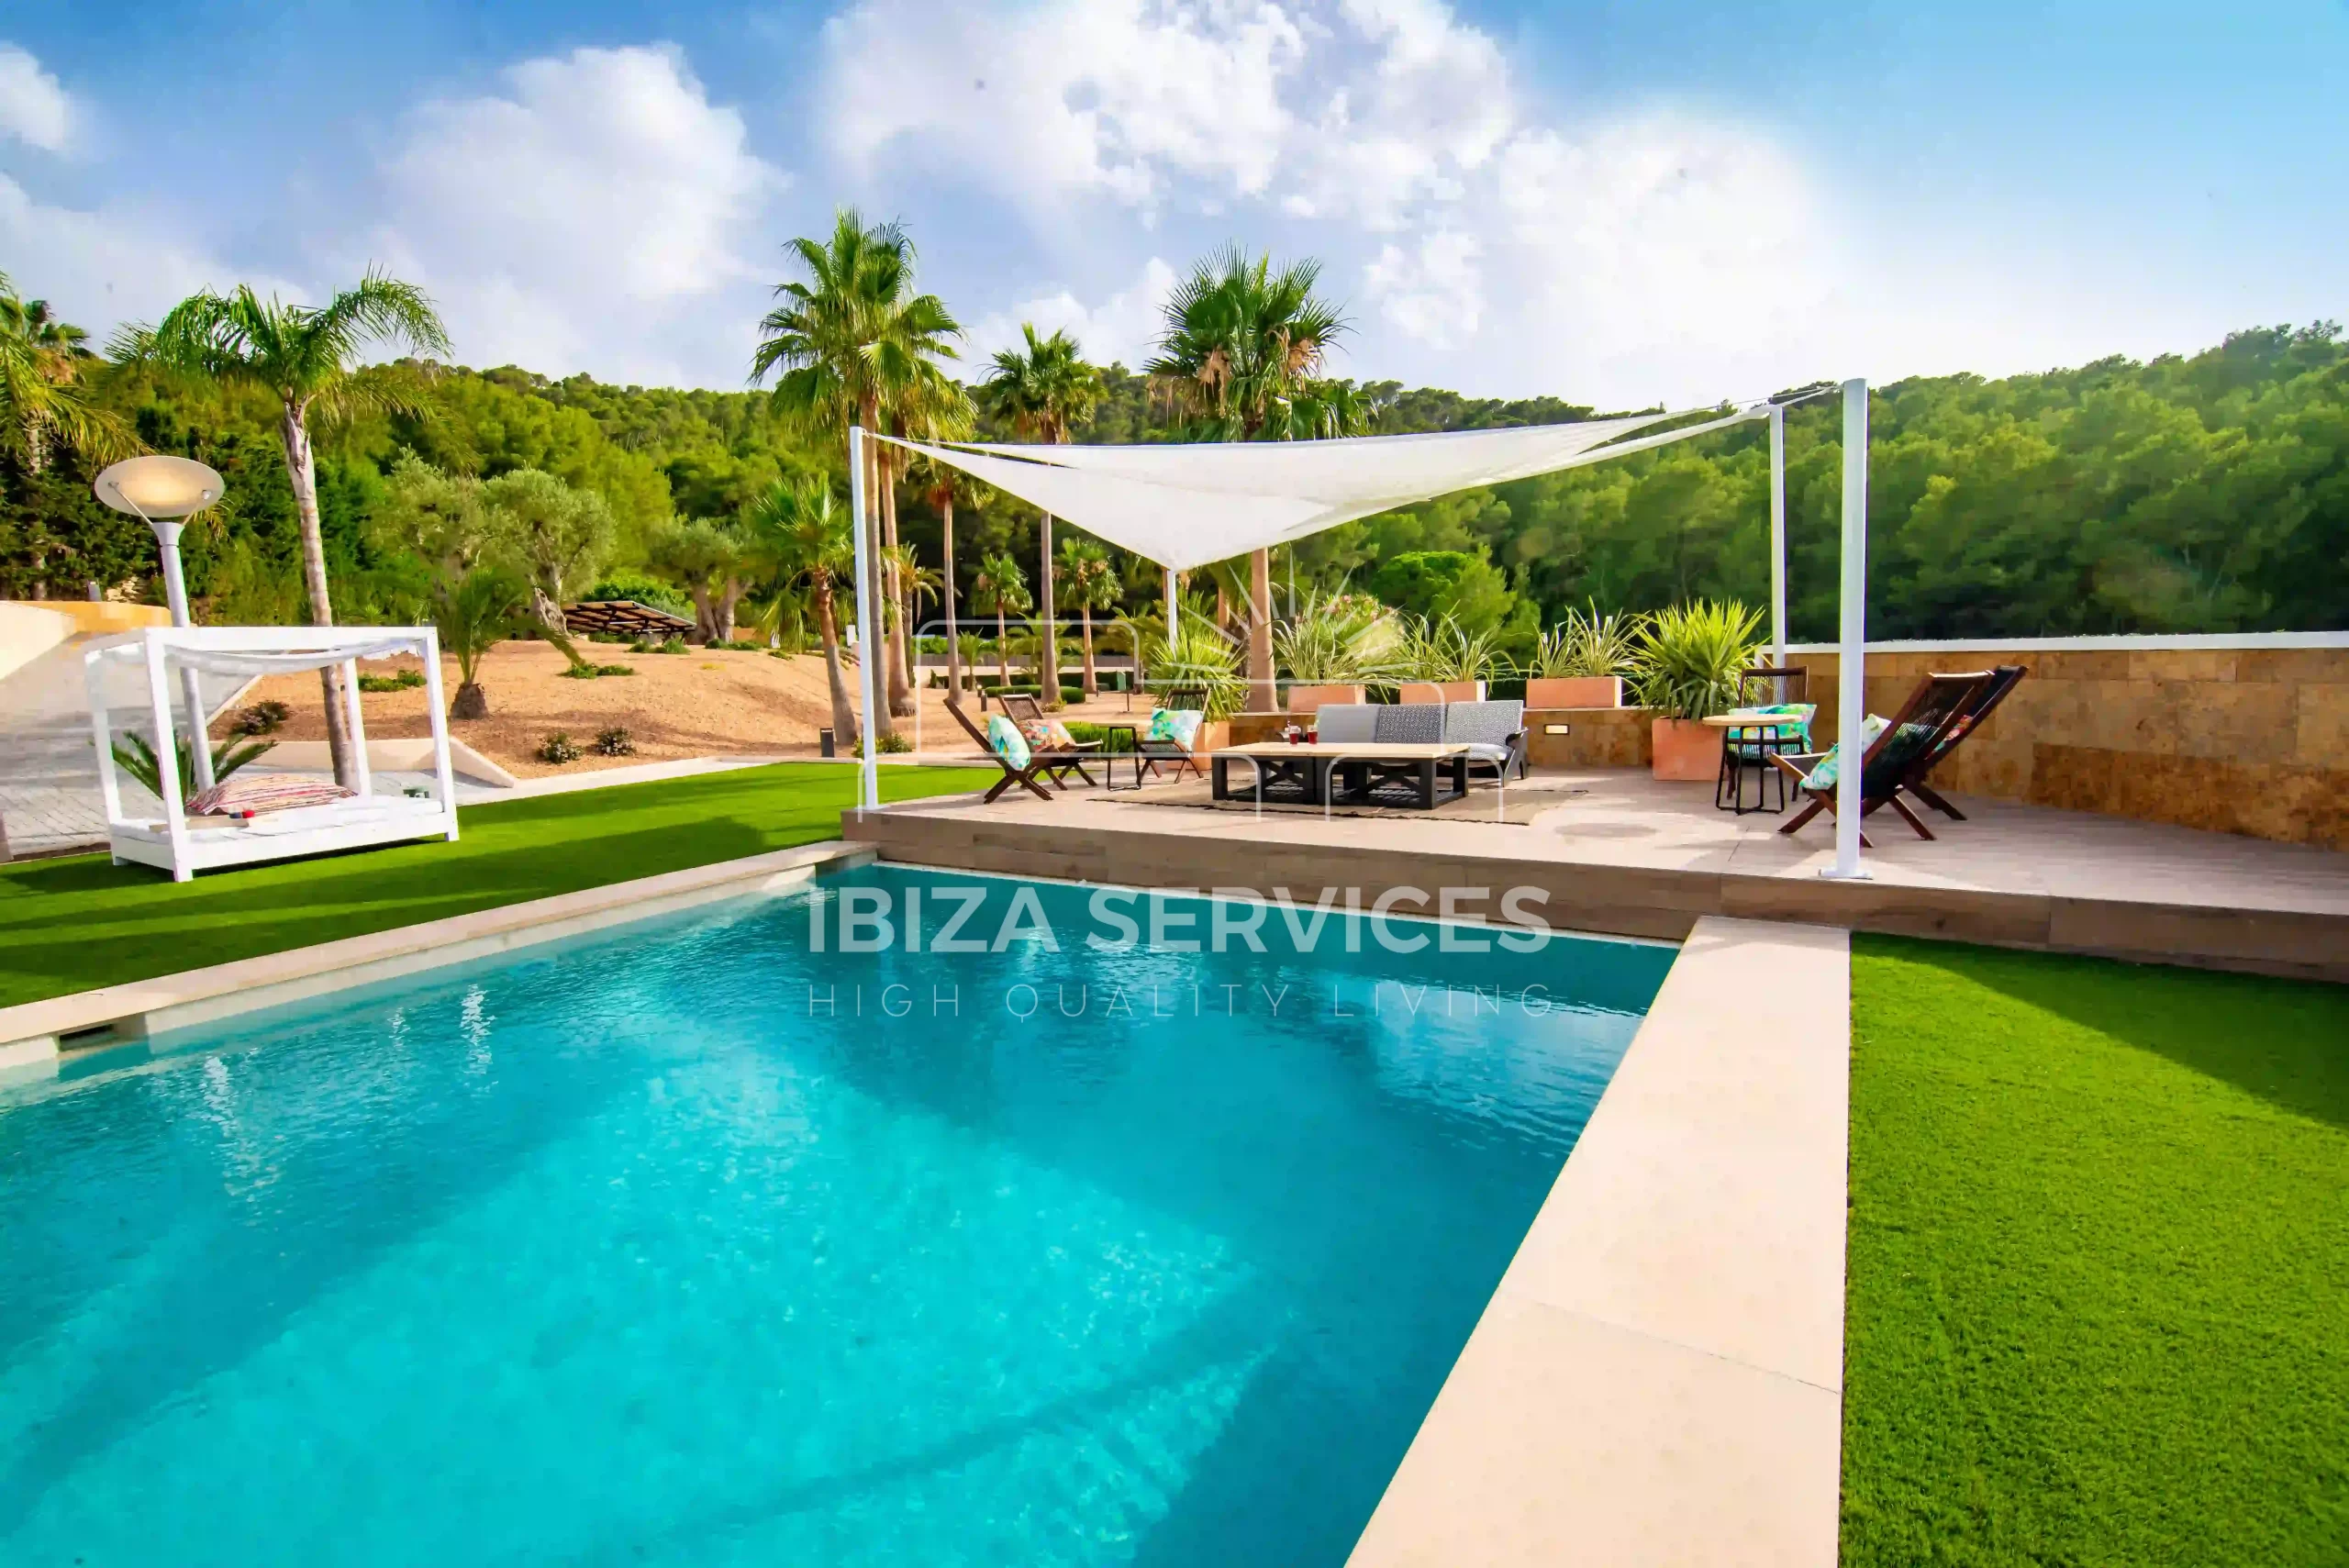 Exceptional Villa with a Stunning country side view 6 bedrooms in Santa Eulalia